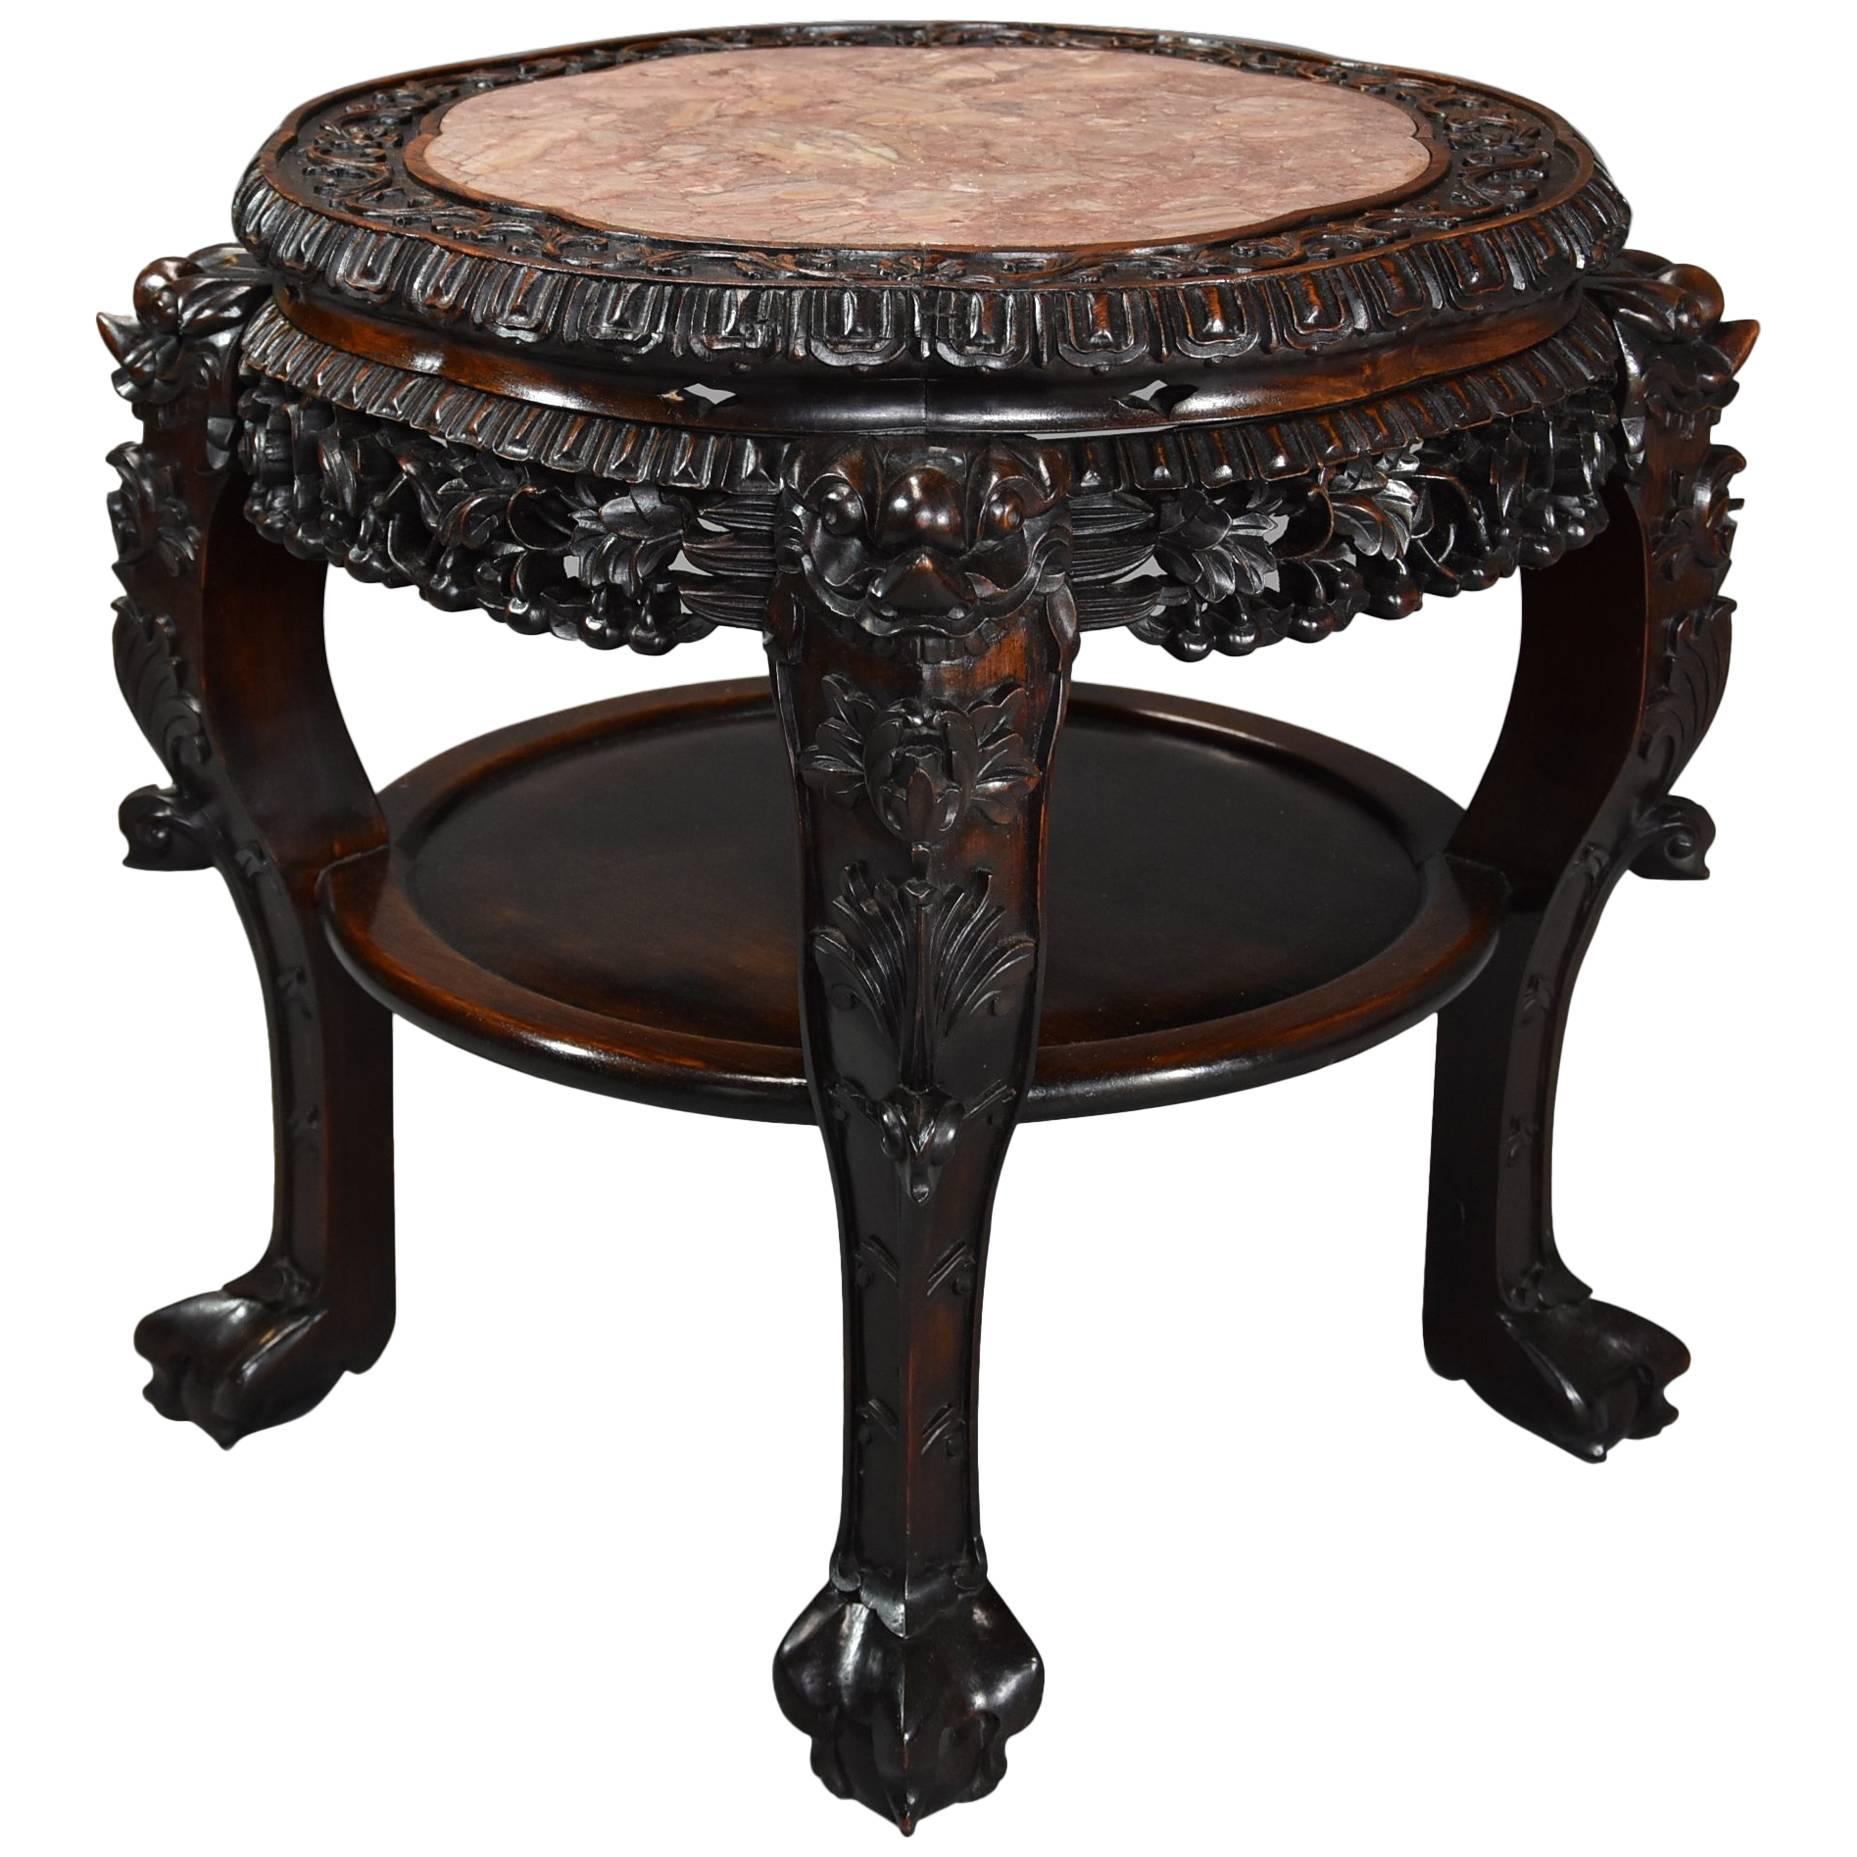 Late 19th Century Chinese Hardwood Circular Pot Stand or Low Table For Sale